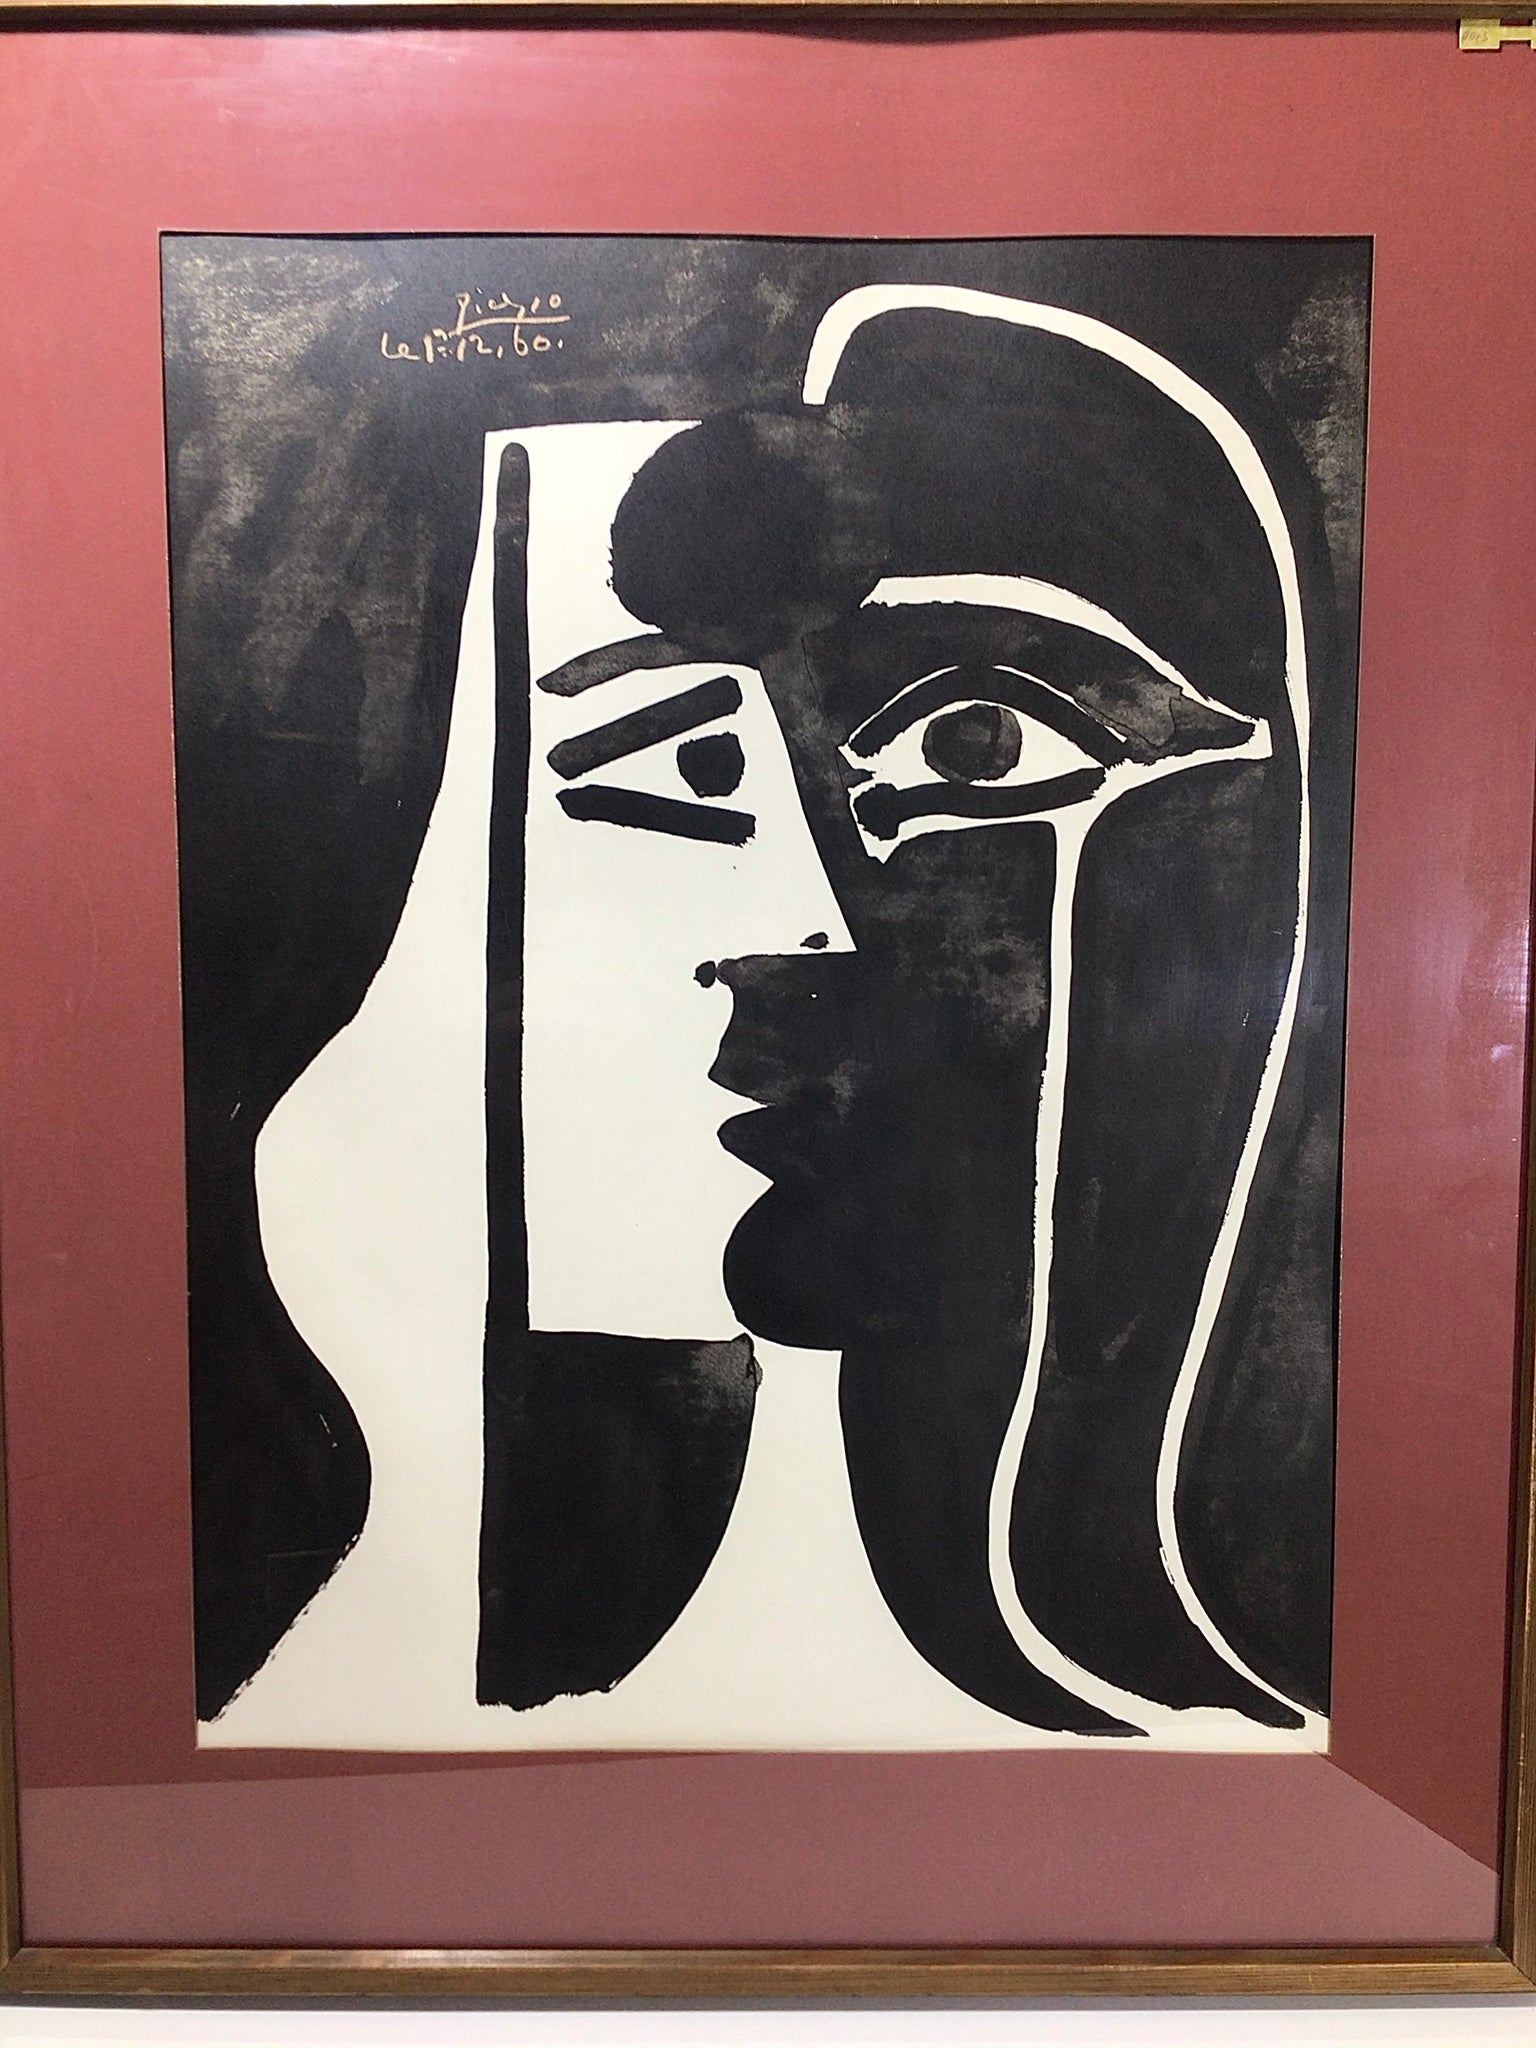 Pablo Picasso “The Kiss” Lithograph 1966 for Picasso Arts – LeMay